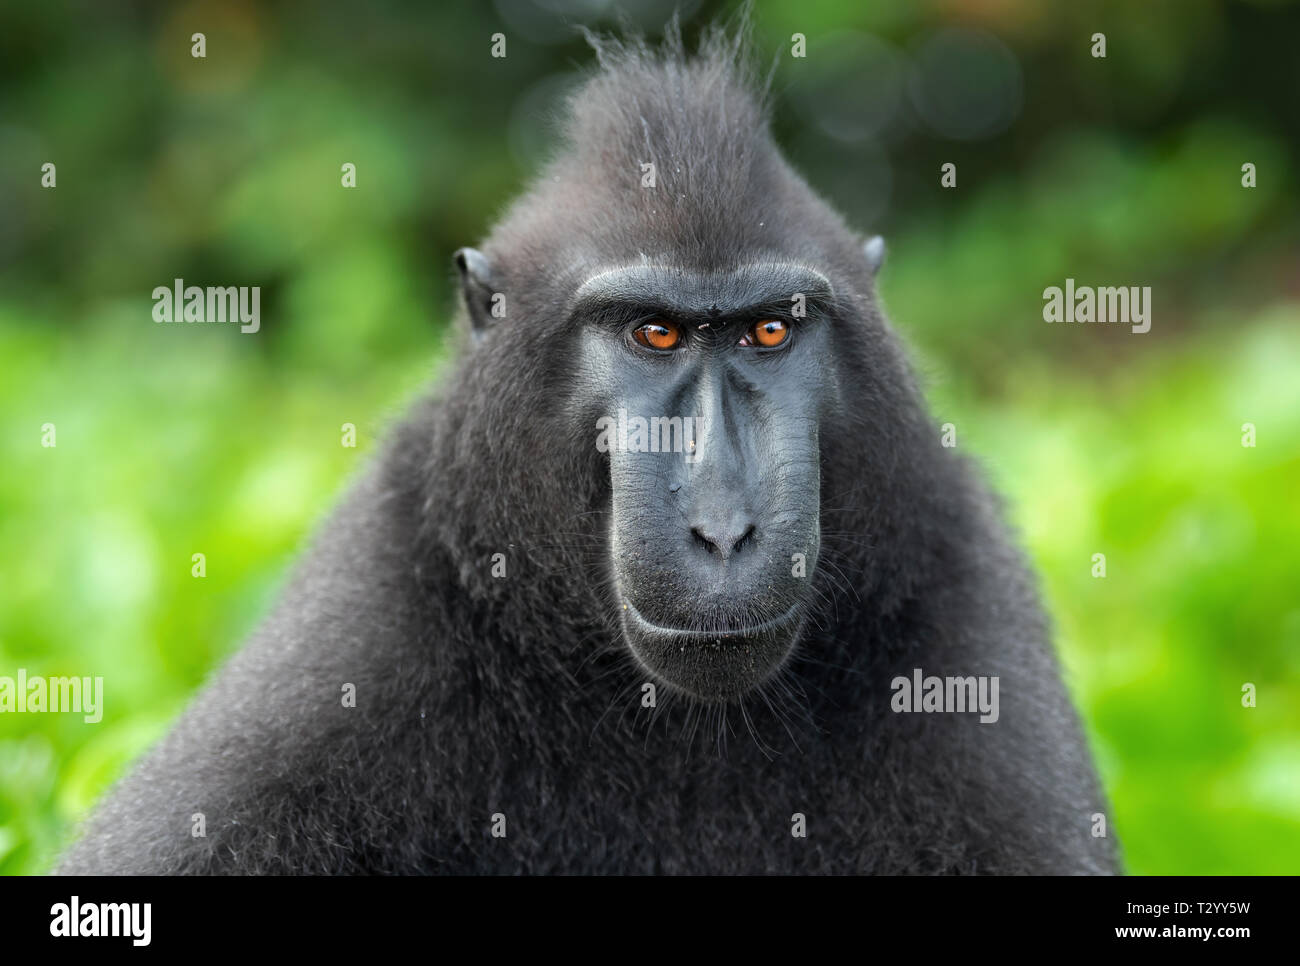 The Celebes crested macaque . Close up portrait, front view. Crested black macaque, Sulawesi crested macaque, or the black ape.  Natural habitat. Sula Stock Photo